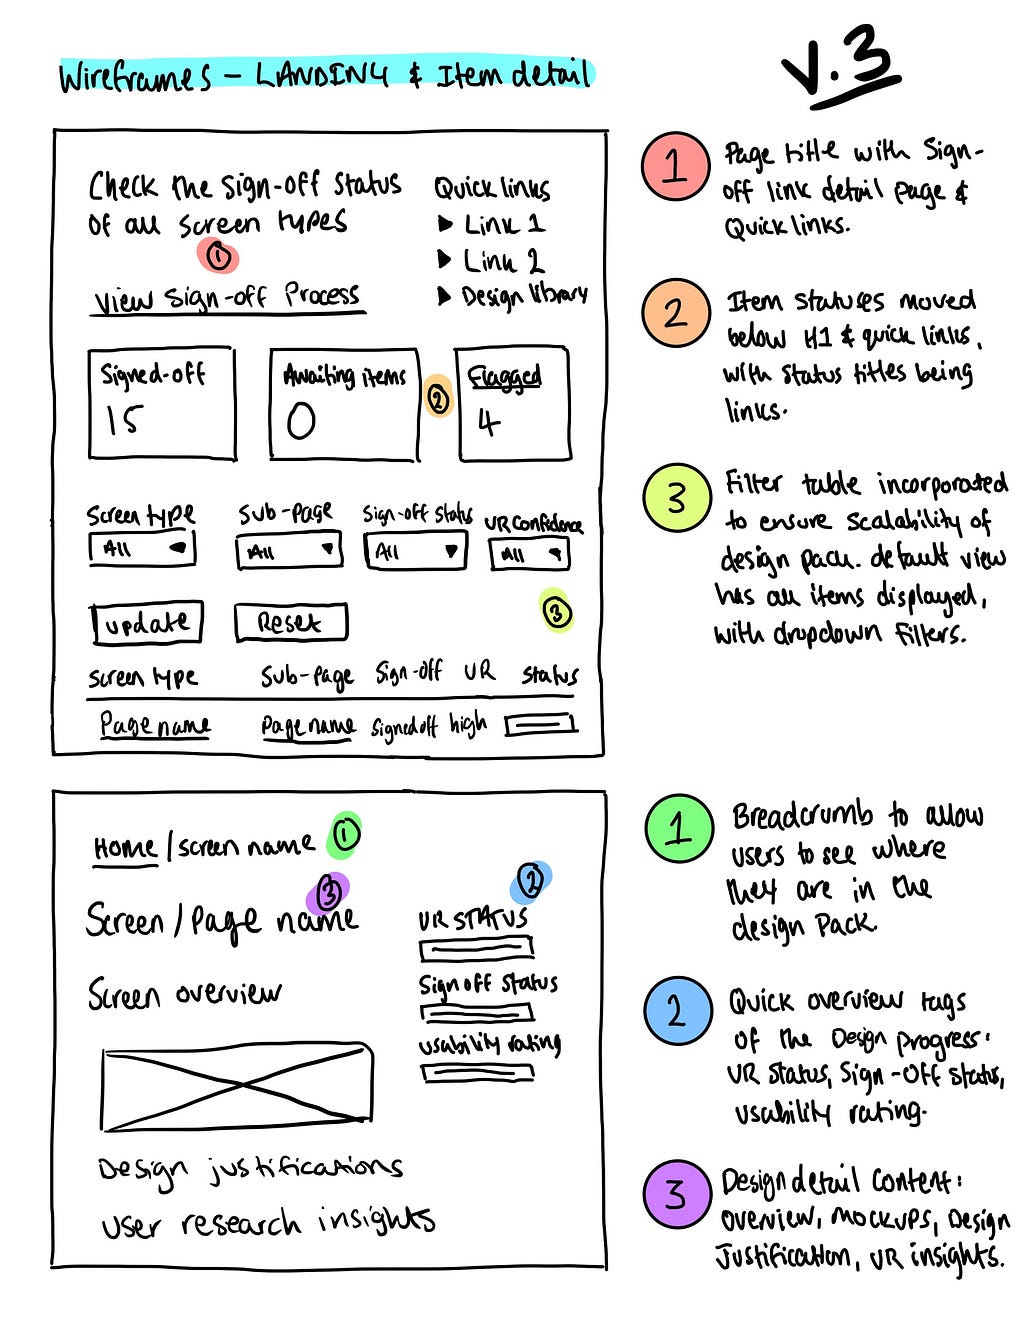 Version 3 sketches demonstrating how the design and research tracker prioritised scalability